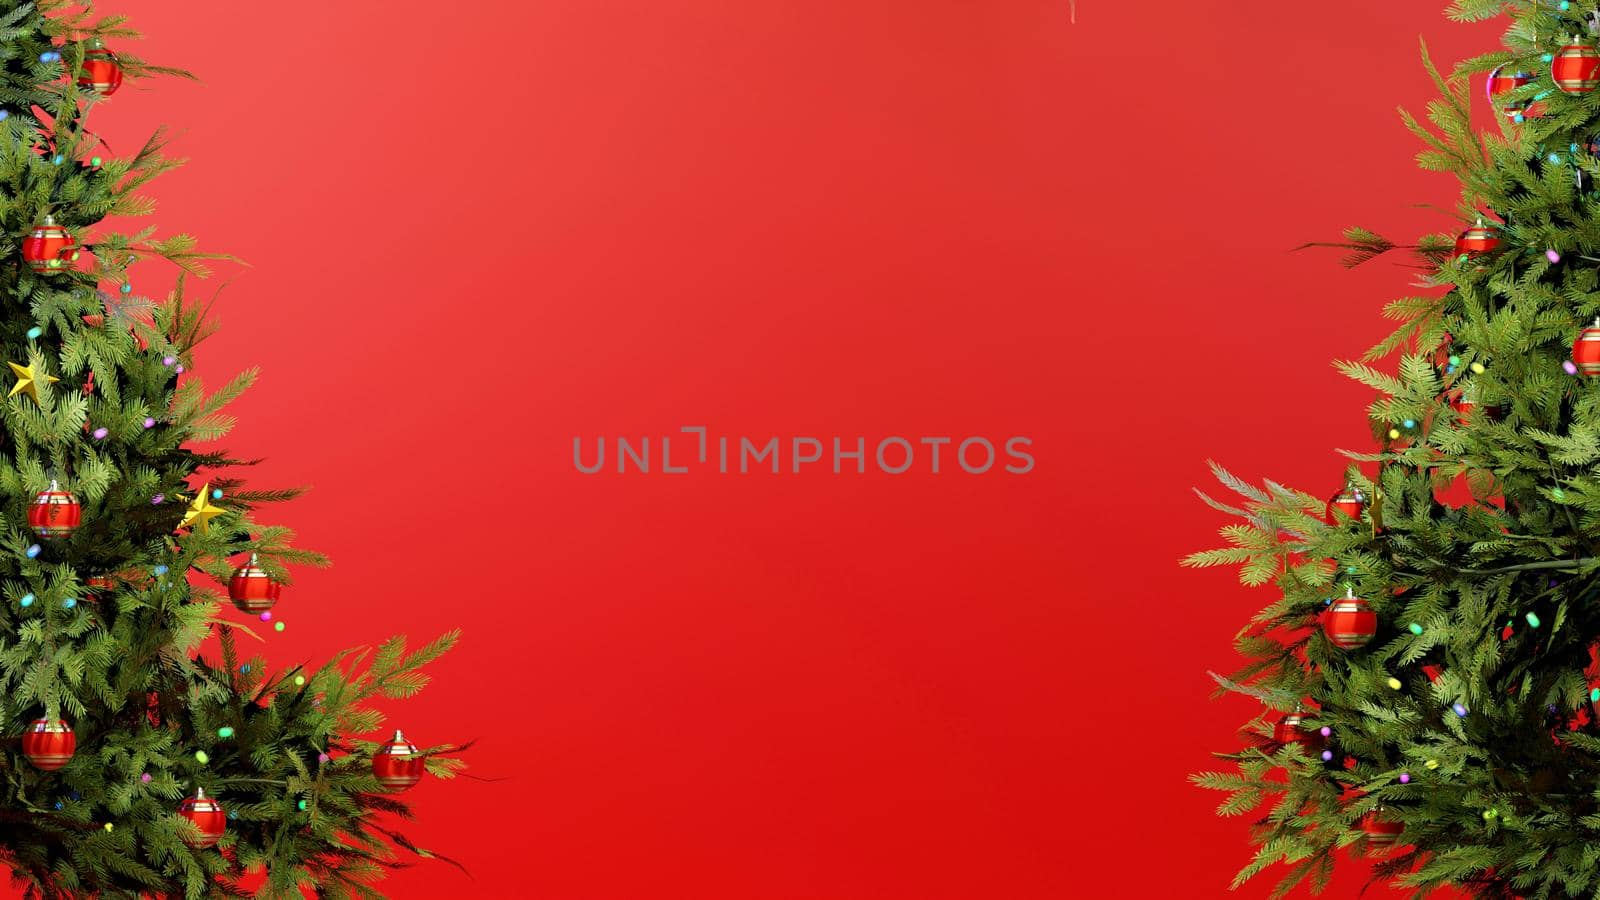 Christmas season postcard template with red background and trees on the sides. Digital 3D render. by hernan_hyper